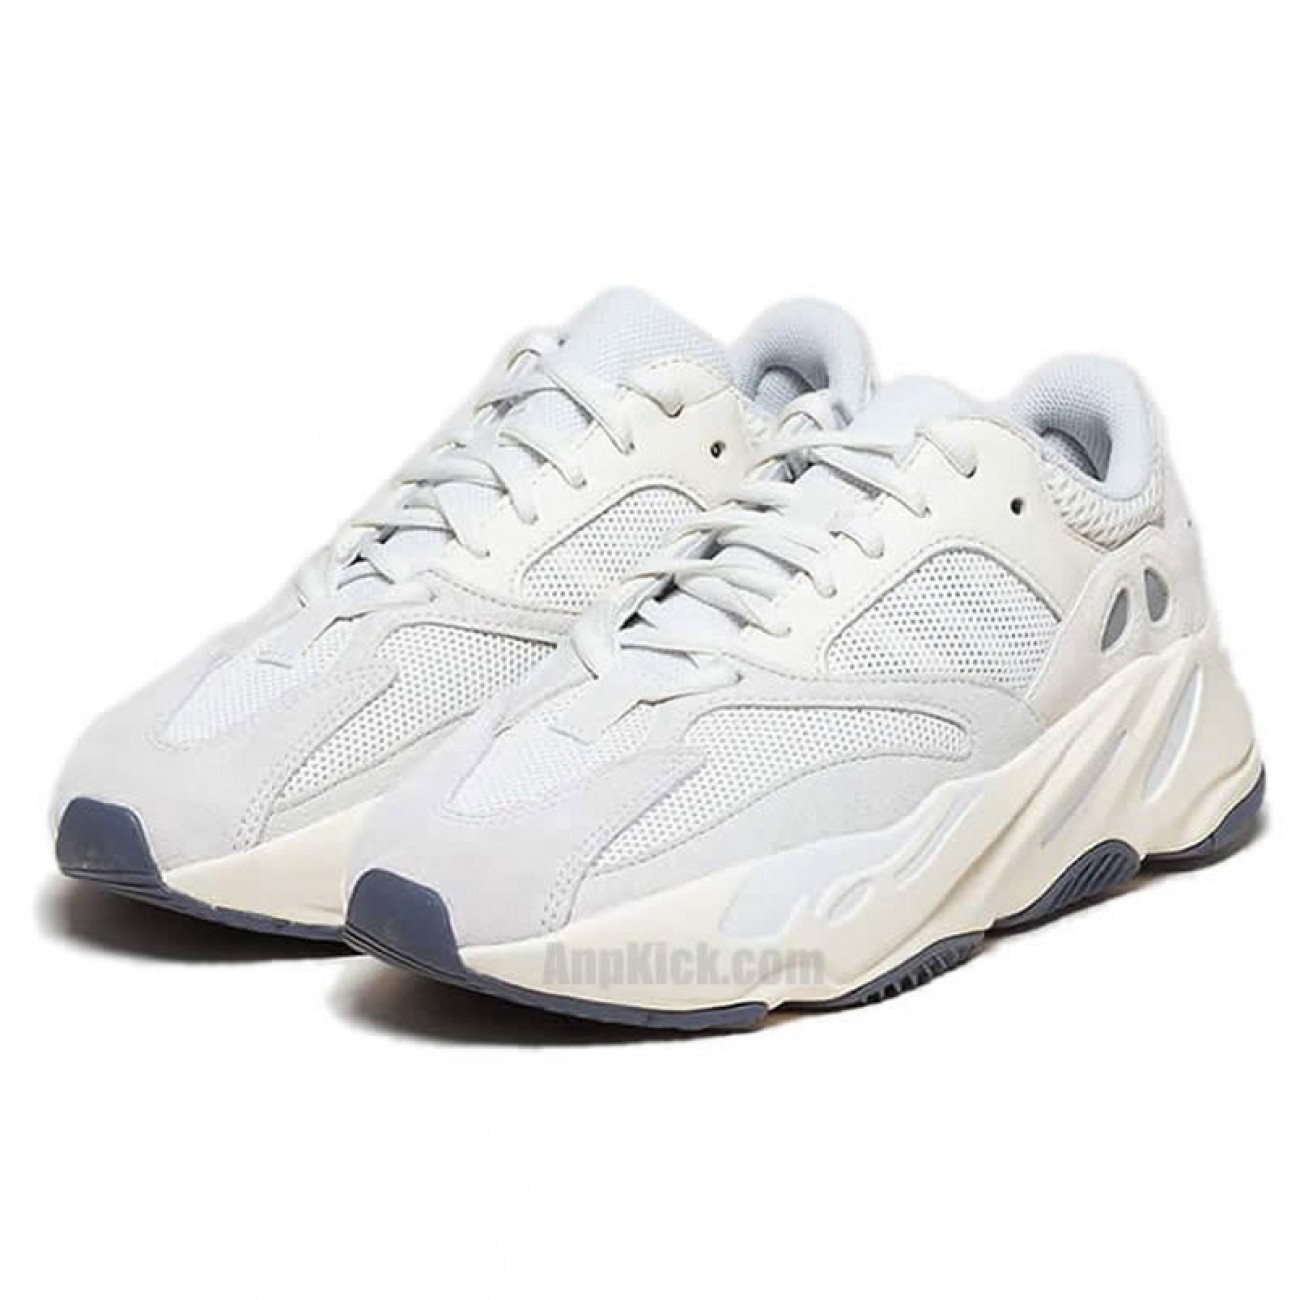 adidas Yeezy Boost 700 Analog Outfit On Foot Release Date EG7596